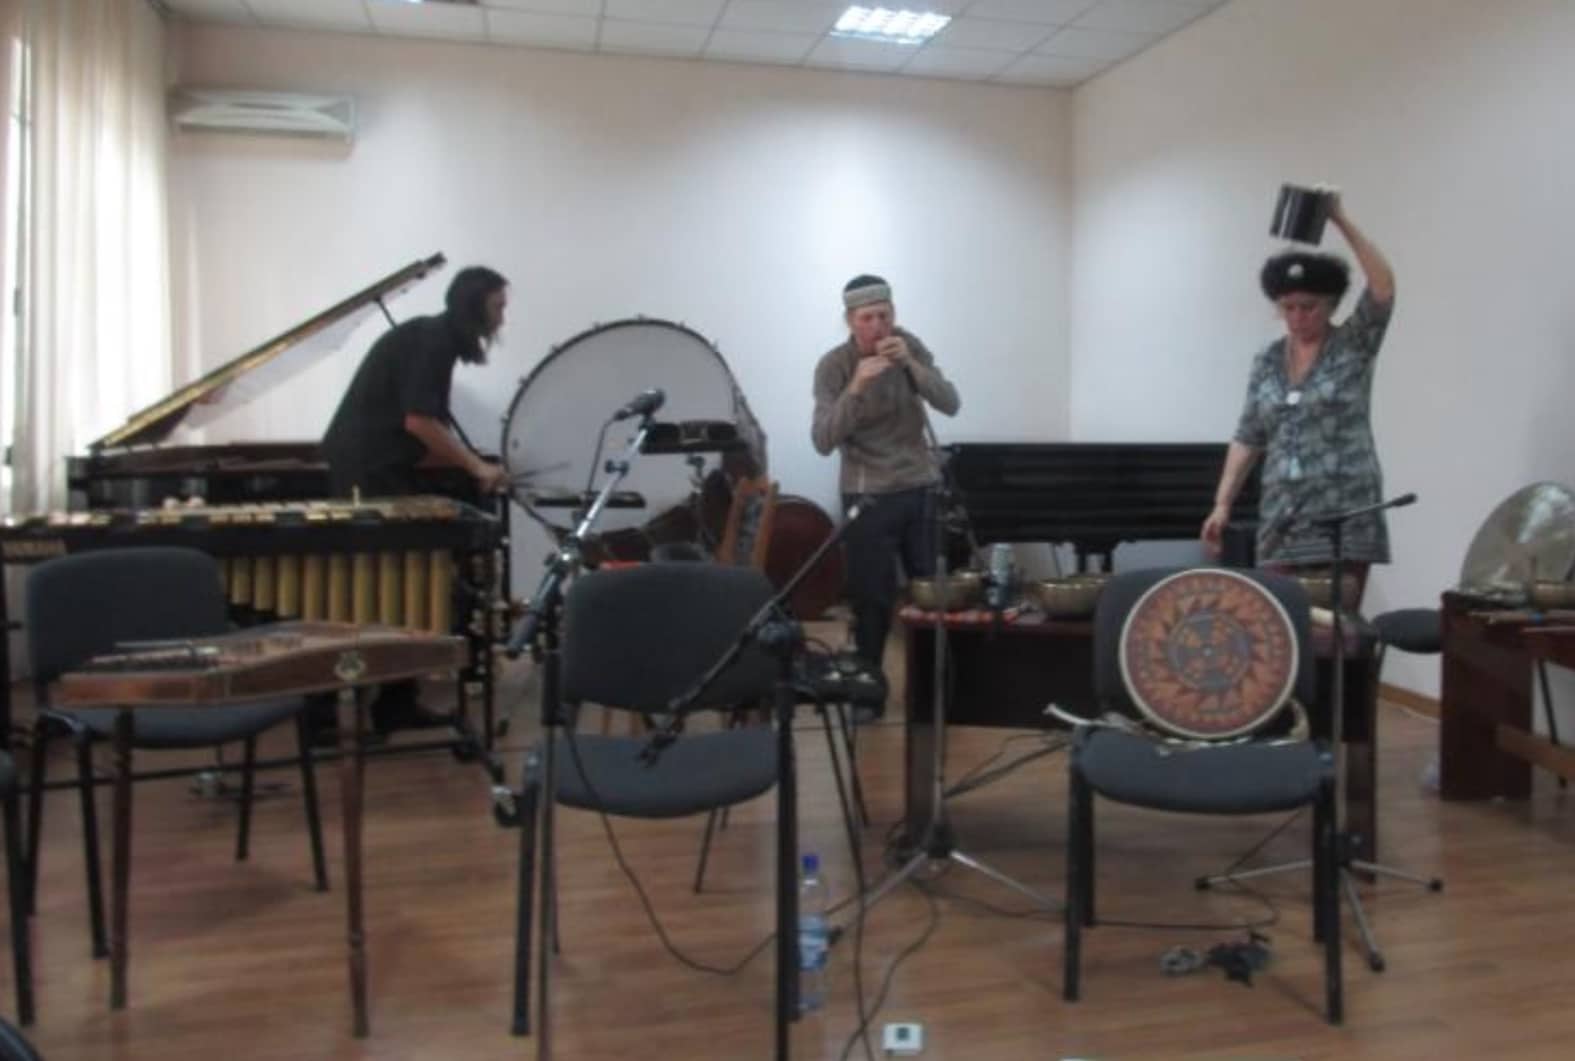 Elemental with master contemporary orchestral percussionist Alibek Kabdurakhmanov